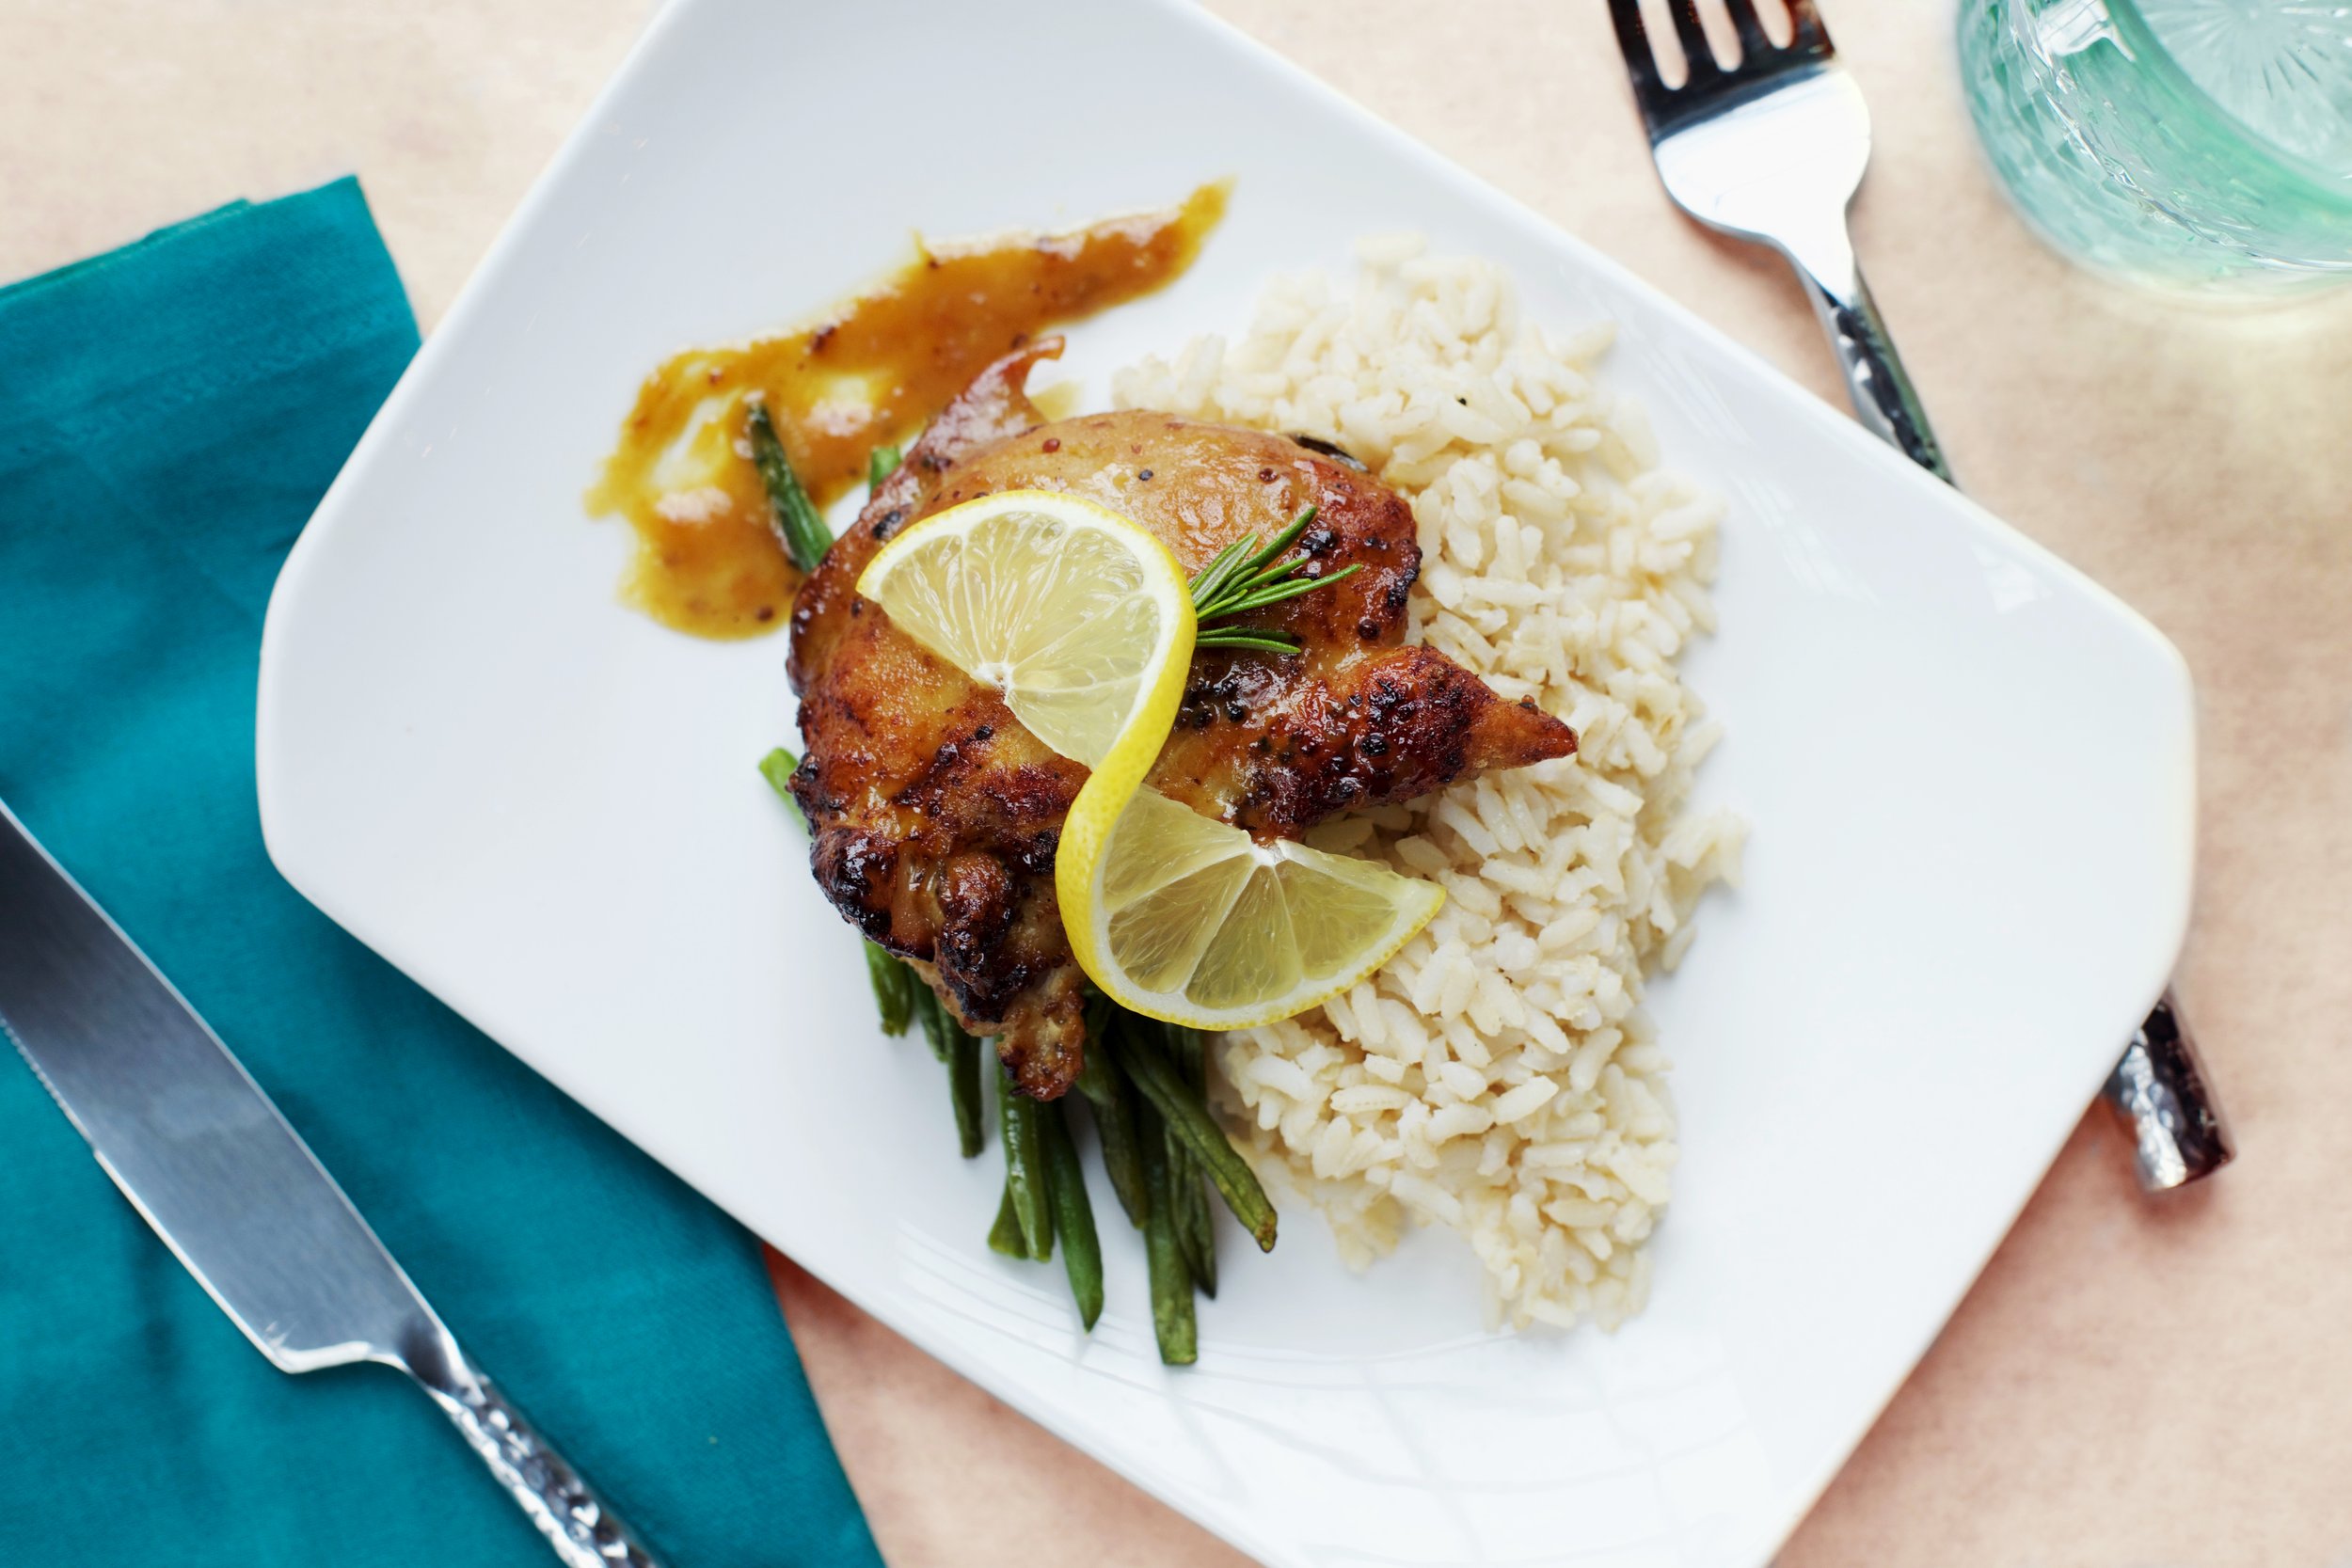  A roasted chicken is plated atop a bed of rice and green beans, garnished with a twisted lemon. The plate is framed by a fork and a knife and a blue napkin. 